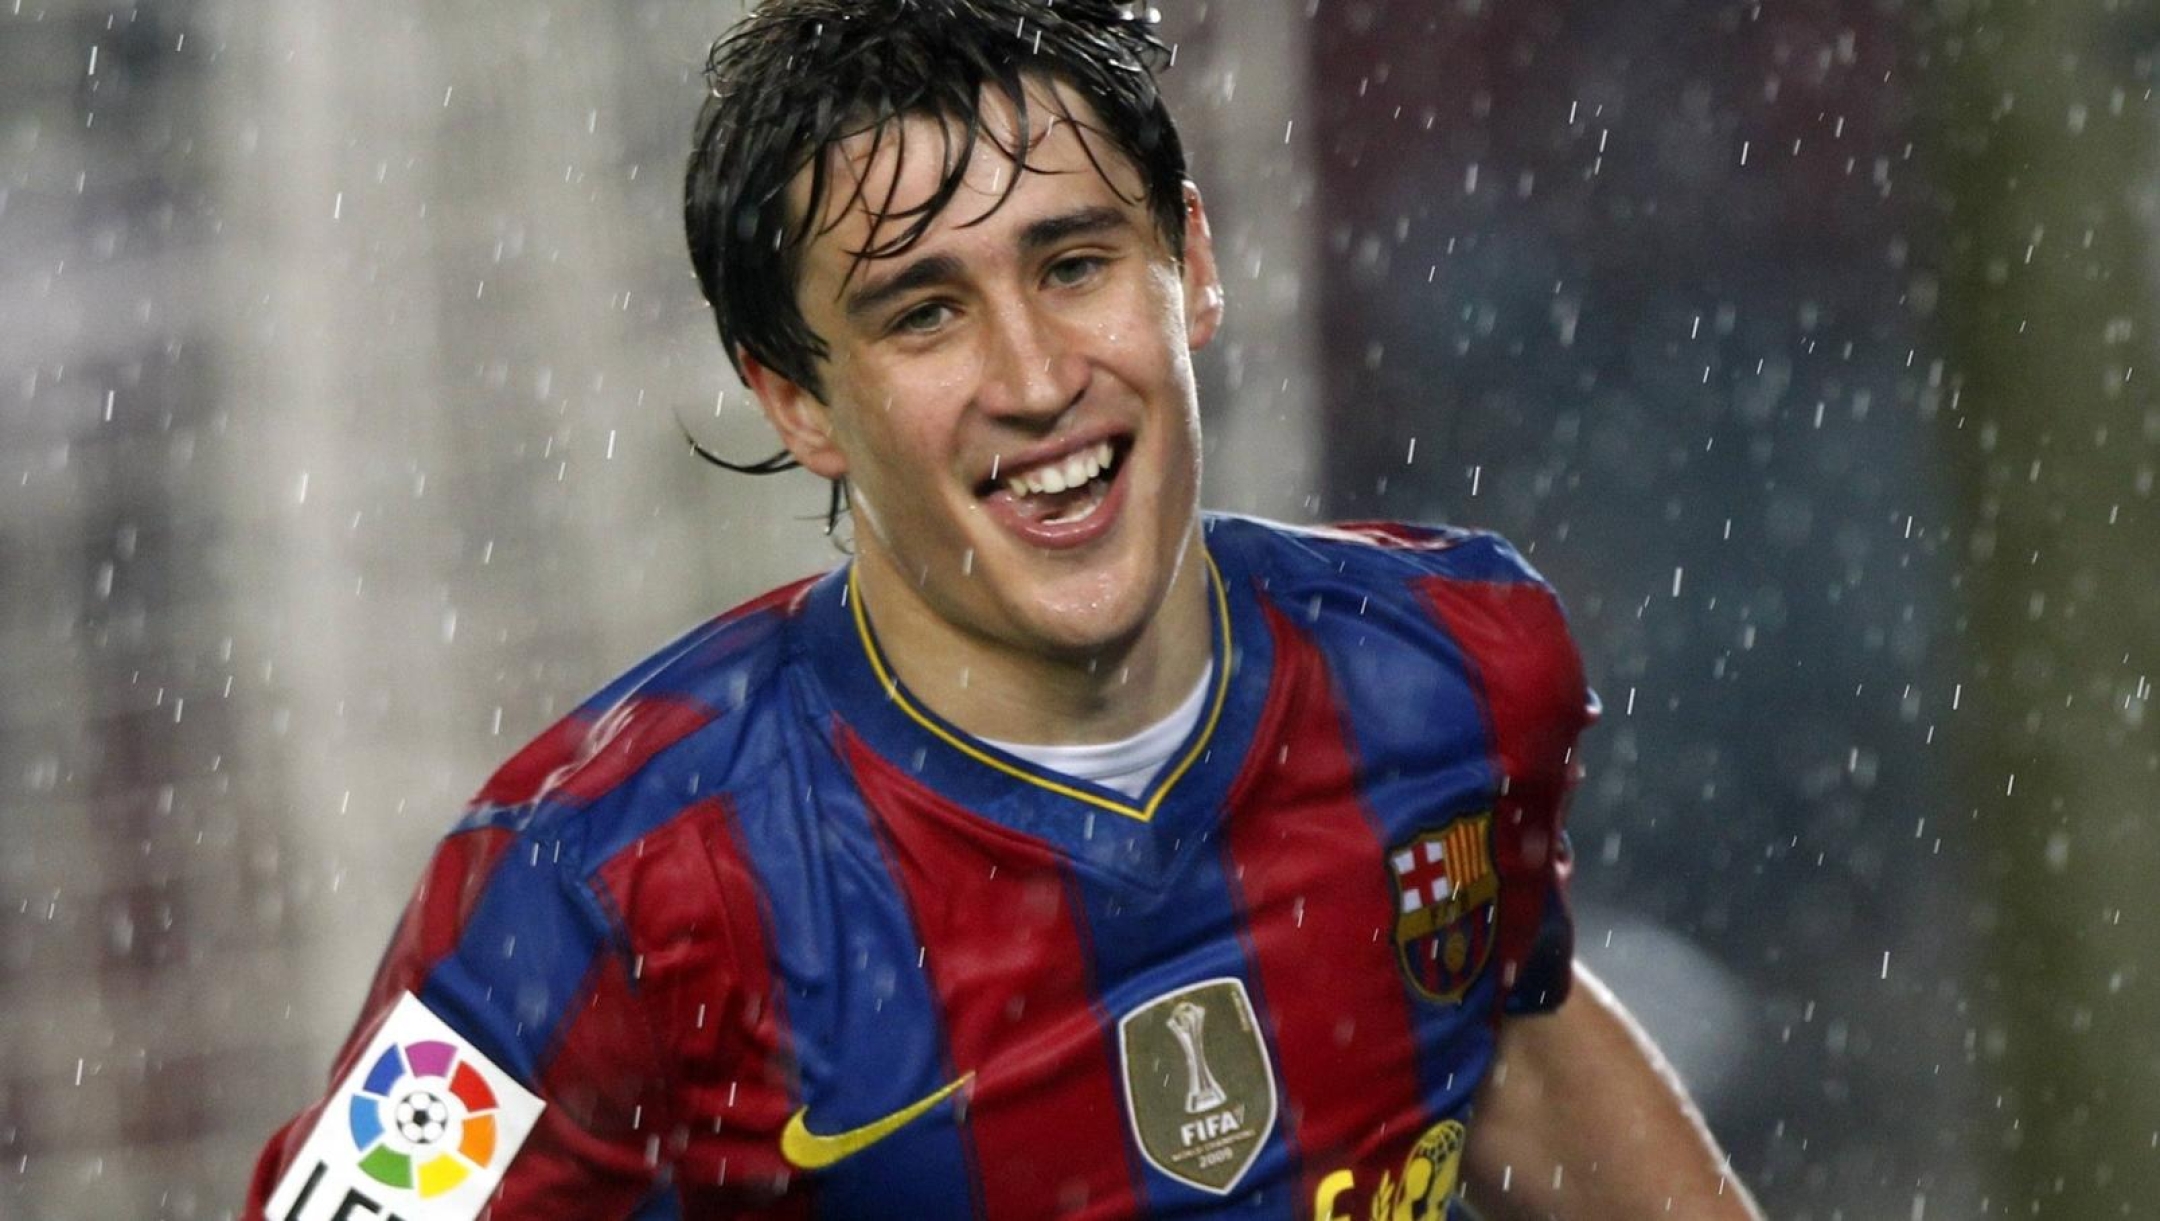 CAMPIONATO SPAGNOLO LIGA  Barcellona's Bojan Krkic celebrates after scoring his goal against Tenerife during their Spanish first division soccer match at Nou Camp stadium in Barcelona May 4, 2010.     REUTERS/Albert Gea (SPAIN - Tags: SPORT SOCCER)